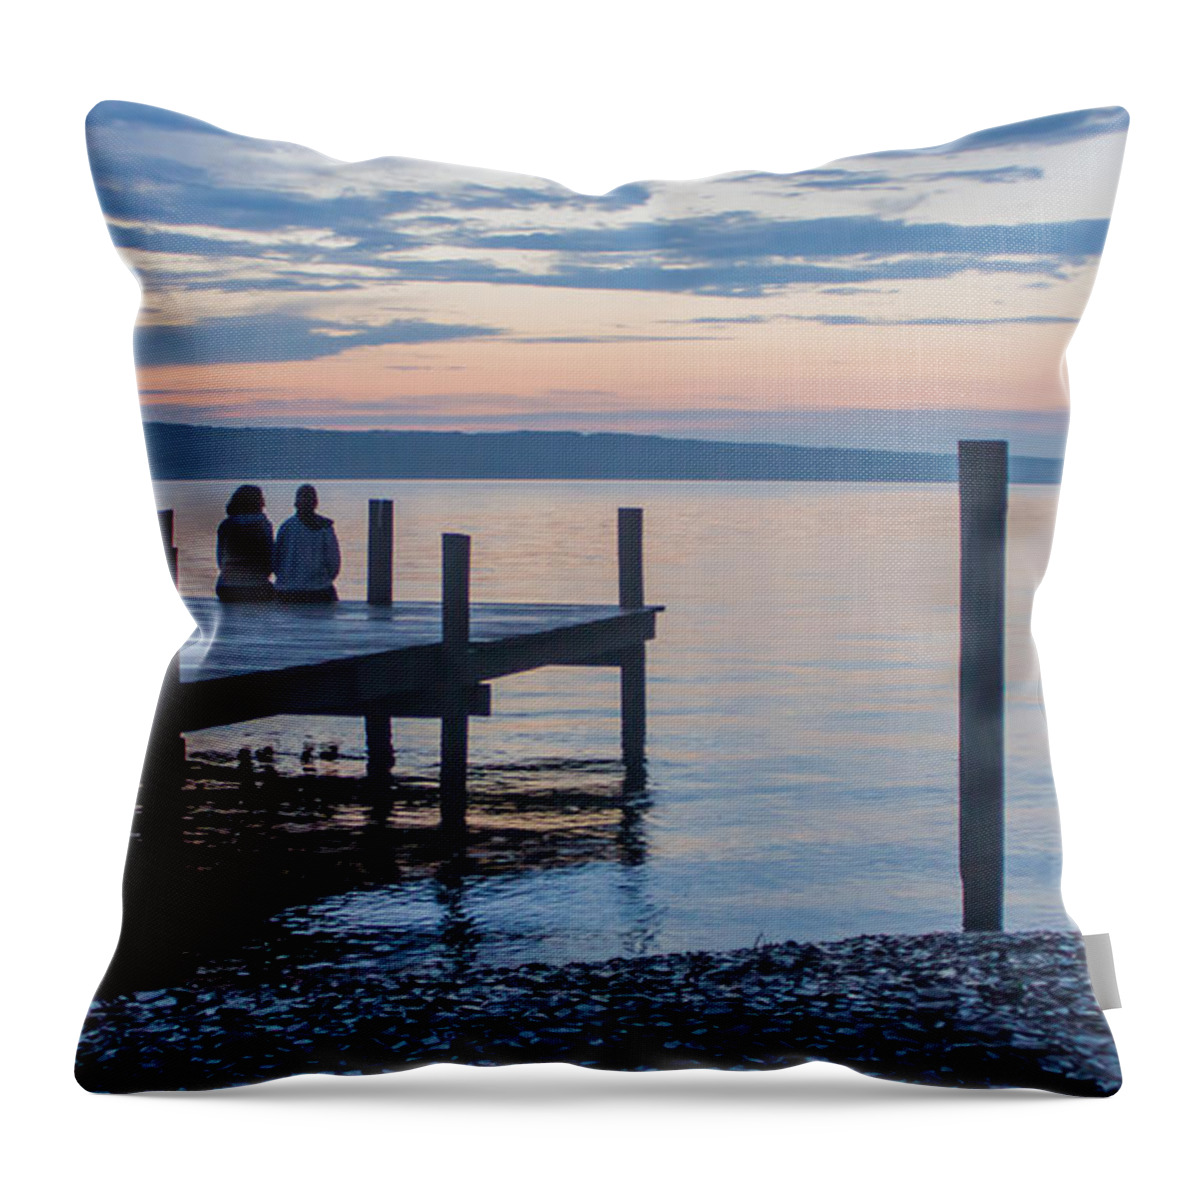 Sisters Throw Pillow featuring the photograph Sisters - Lakeside Living at Sunset by Photographic Arts And Design Studio